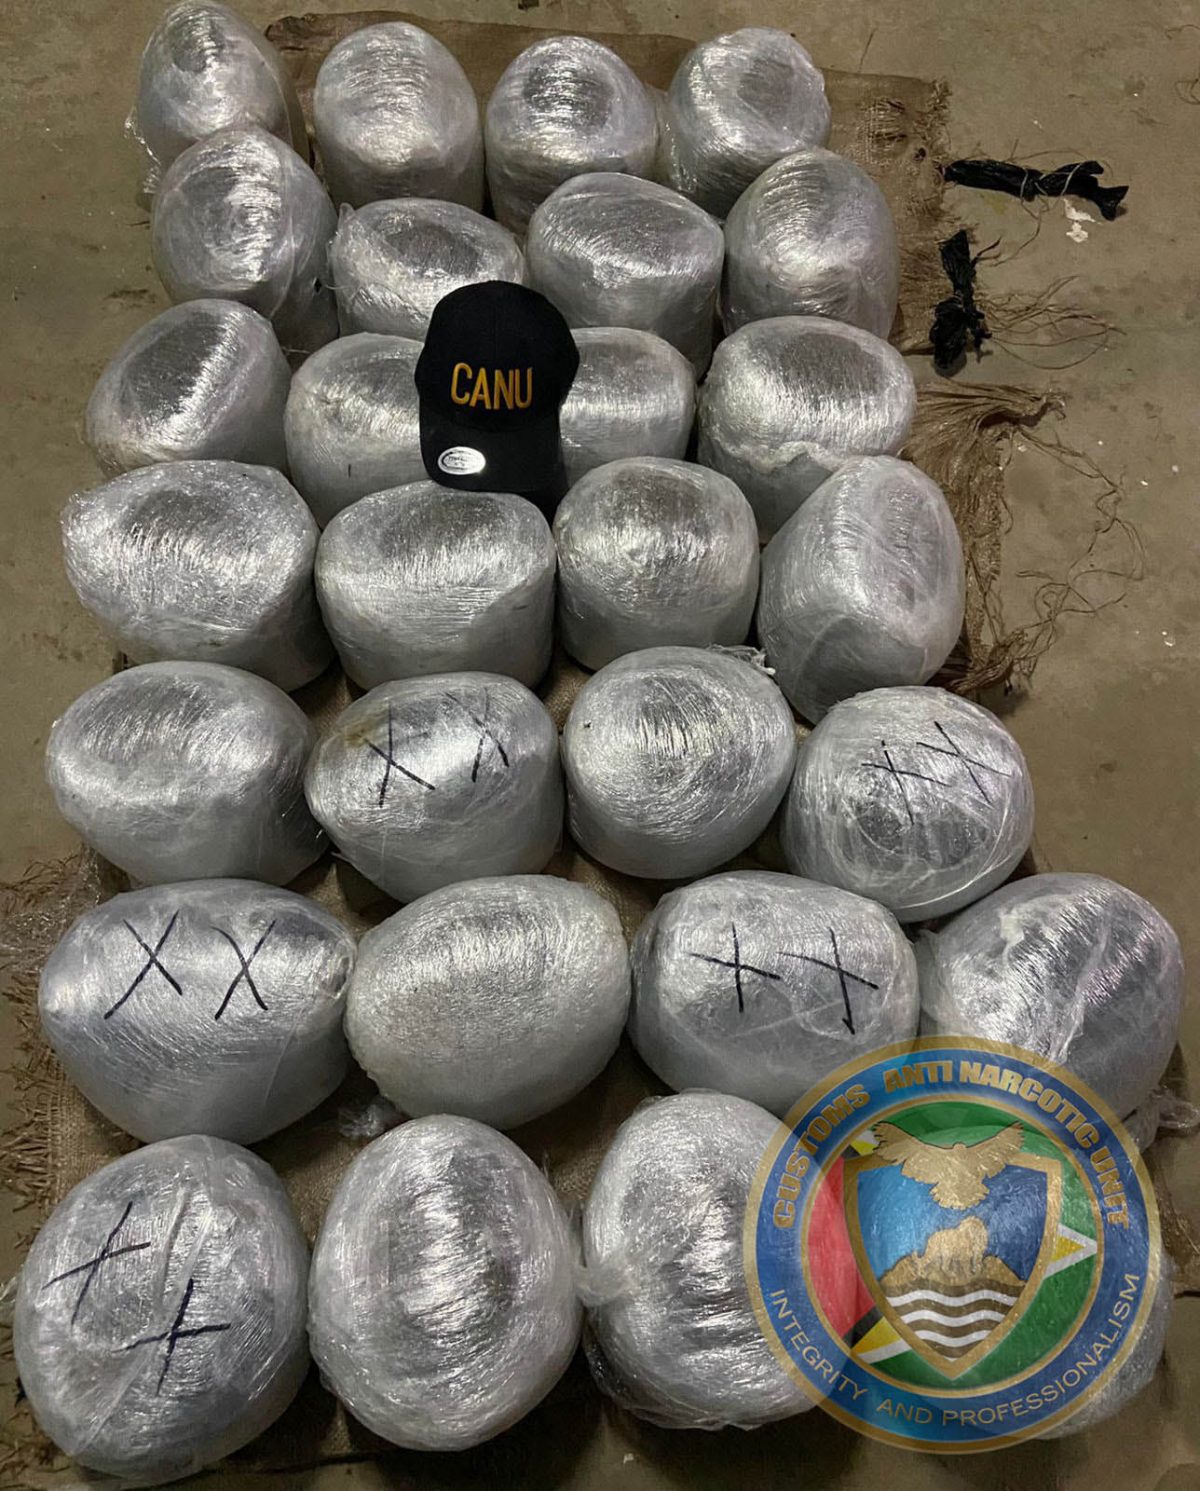 The parcels found during the bust by CANU agents